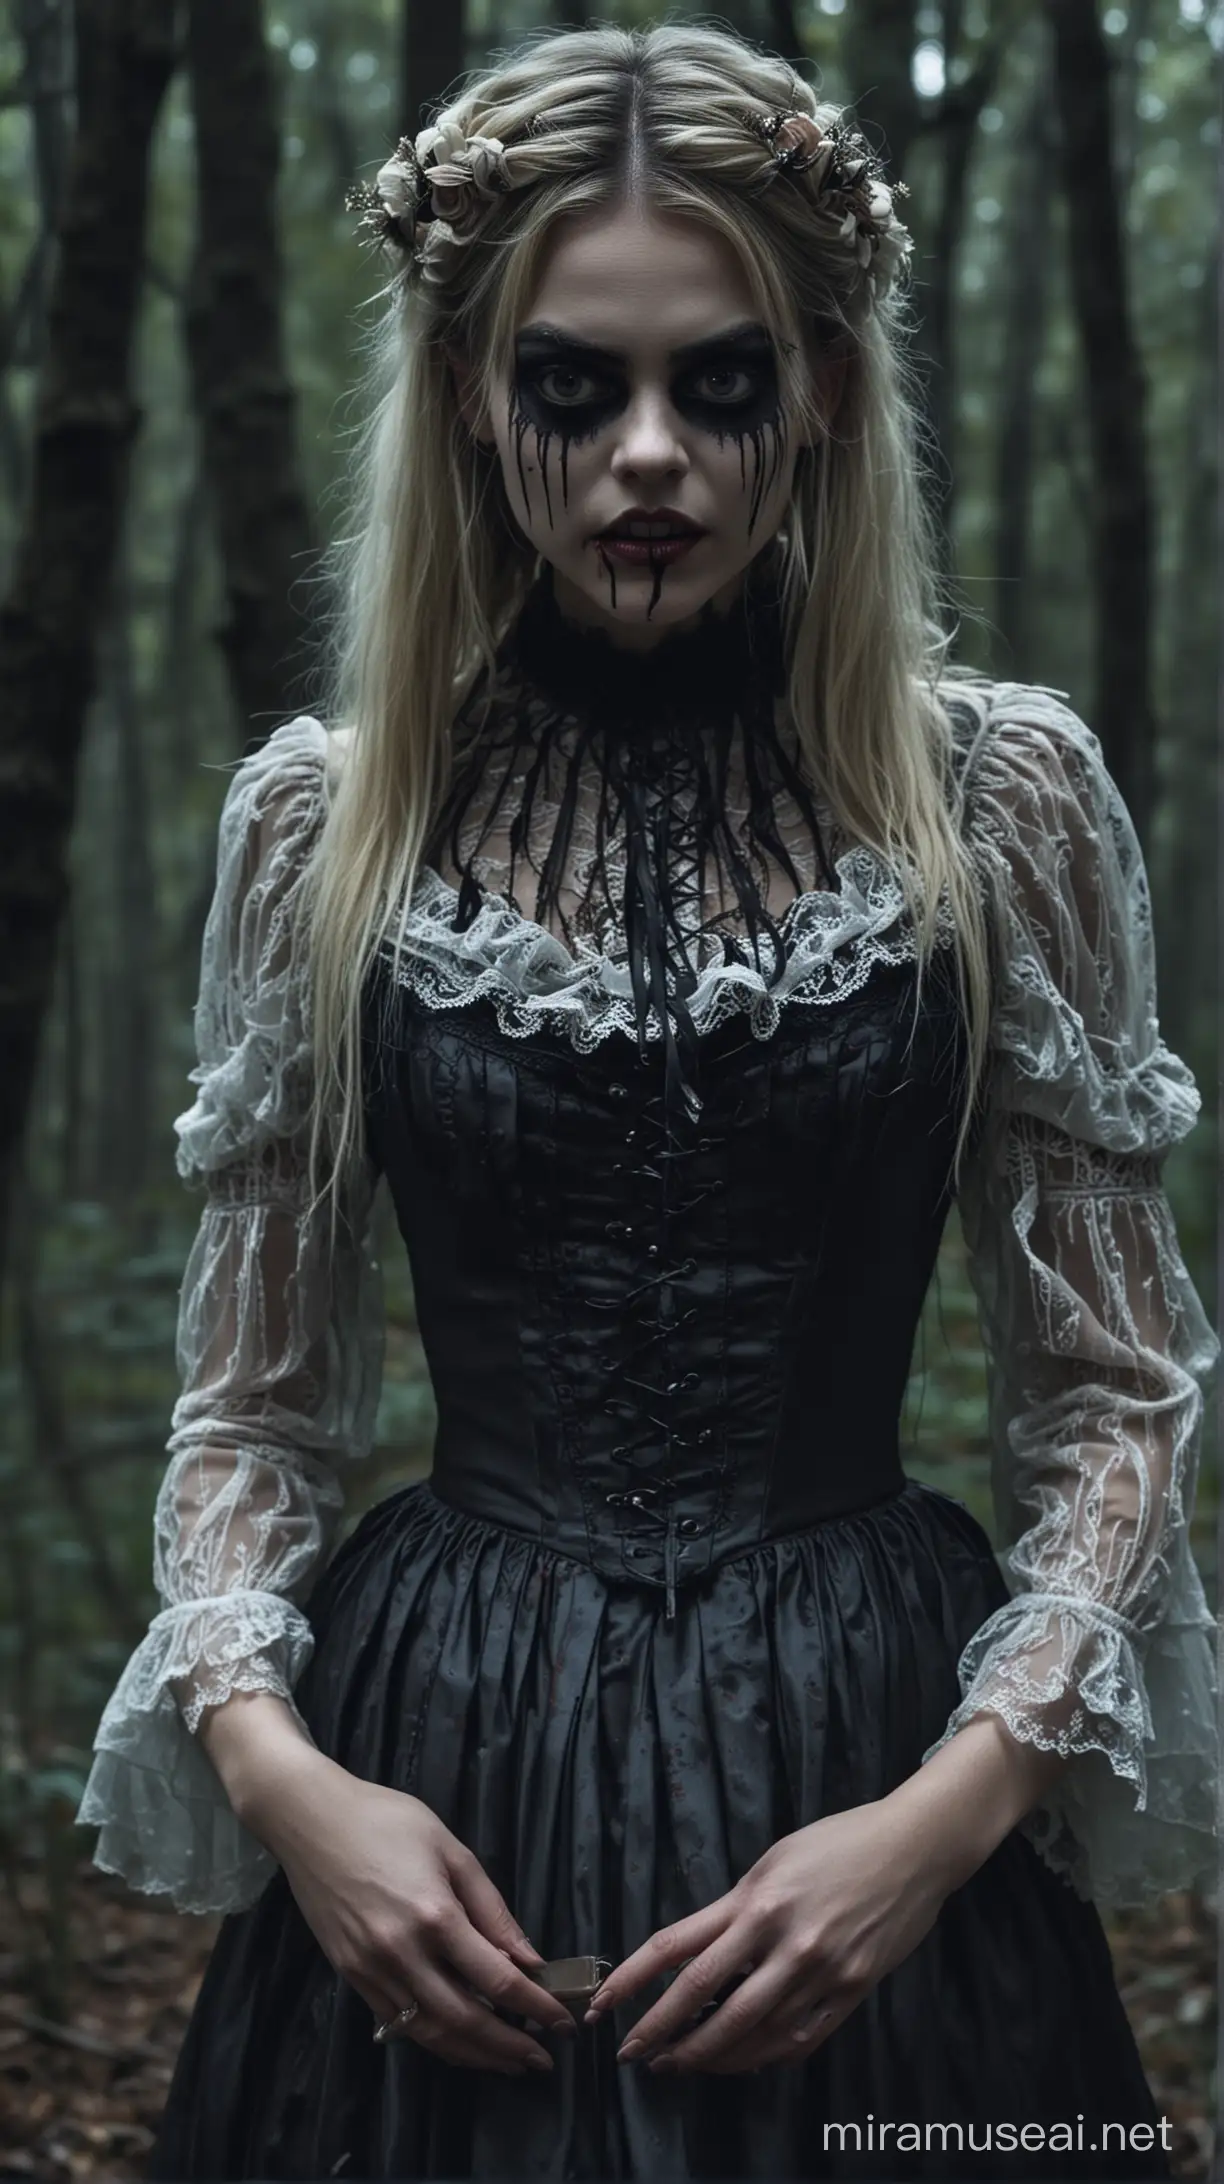 a close up of a girl kids in a dress standing in the dark forest, with makeup and makeup on in a forest, scary look, with black sclera eyes, black eyes and sclera, black sclera eyes, white color face, blood arround the mouth, samara weaving vampire, anya taylor - joy vampire queen, face looking front, scary face, spooky, creepy face, slit mouthed, with victorian clothing, a scary victorian woman, wearing victorian clothes, victorian clothing, victorian lady, victorian gothic, 1850s clothing, victorian goth, 1850s era clothing, victorian era, victorian style costume, wearing a gothic dress, 1850s era clothes, night time in the forest,